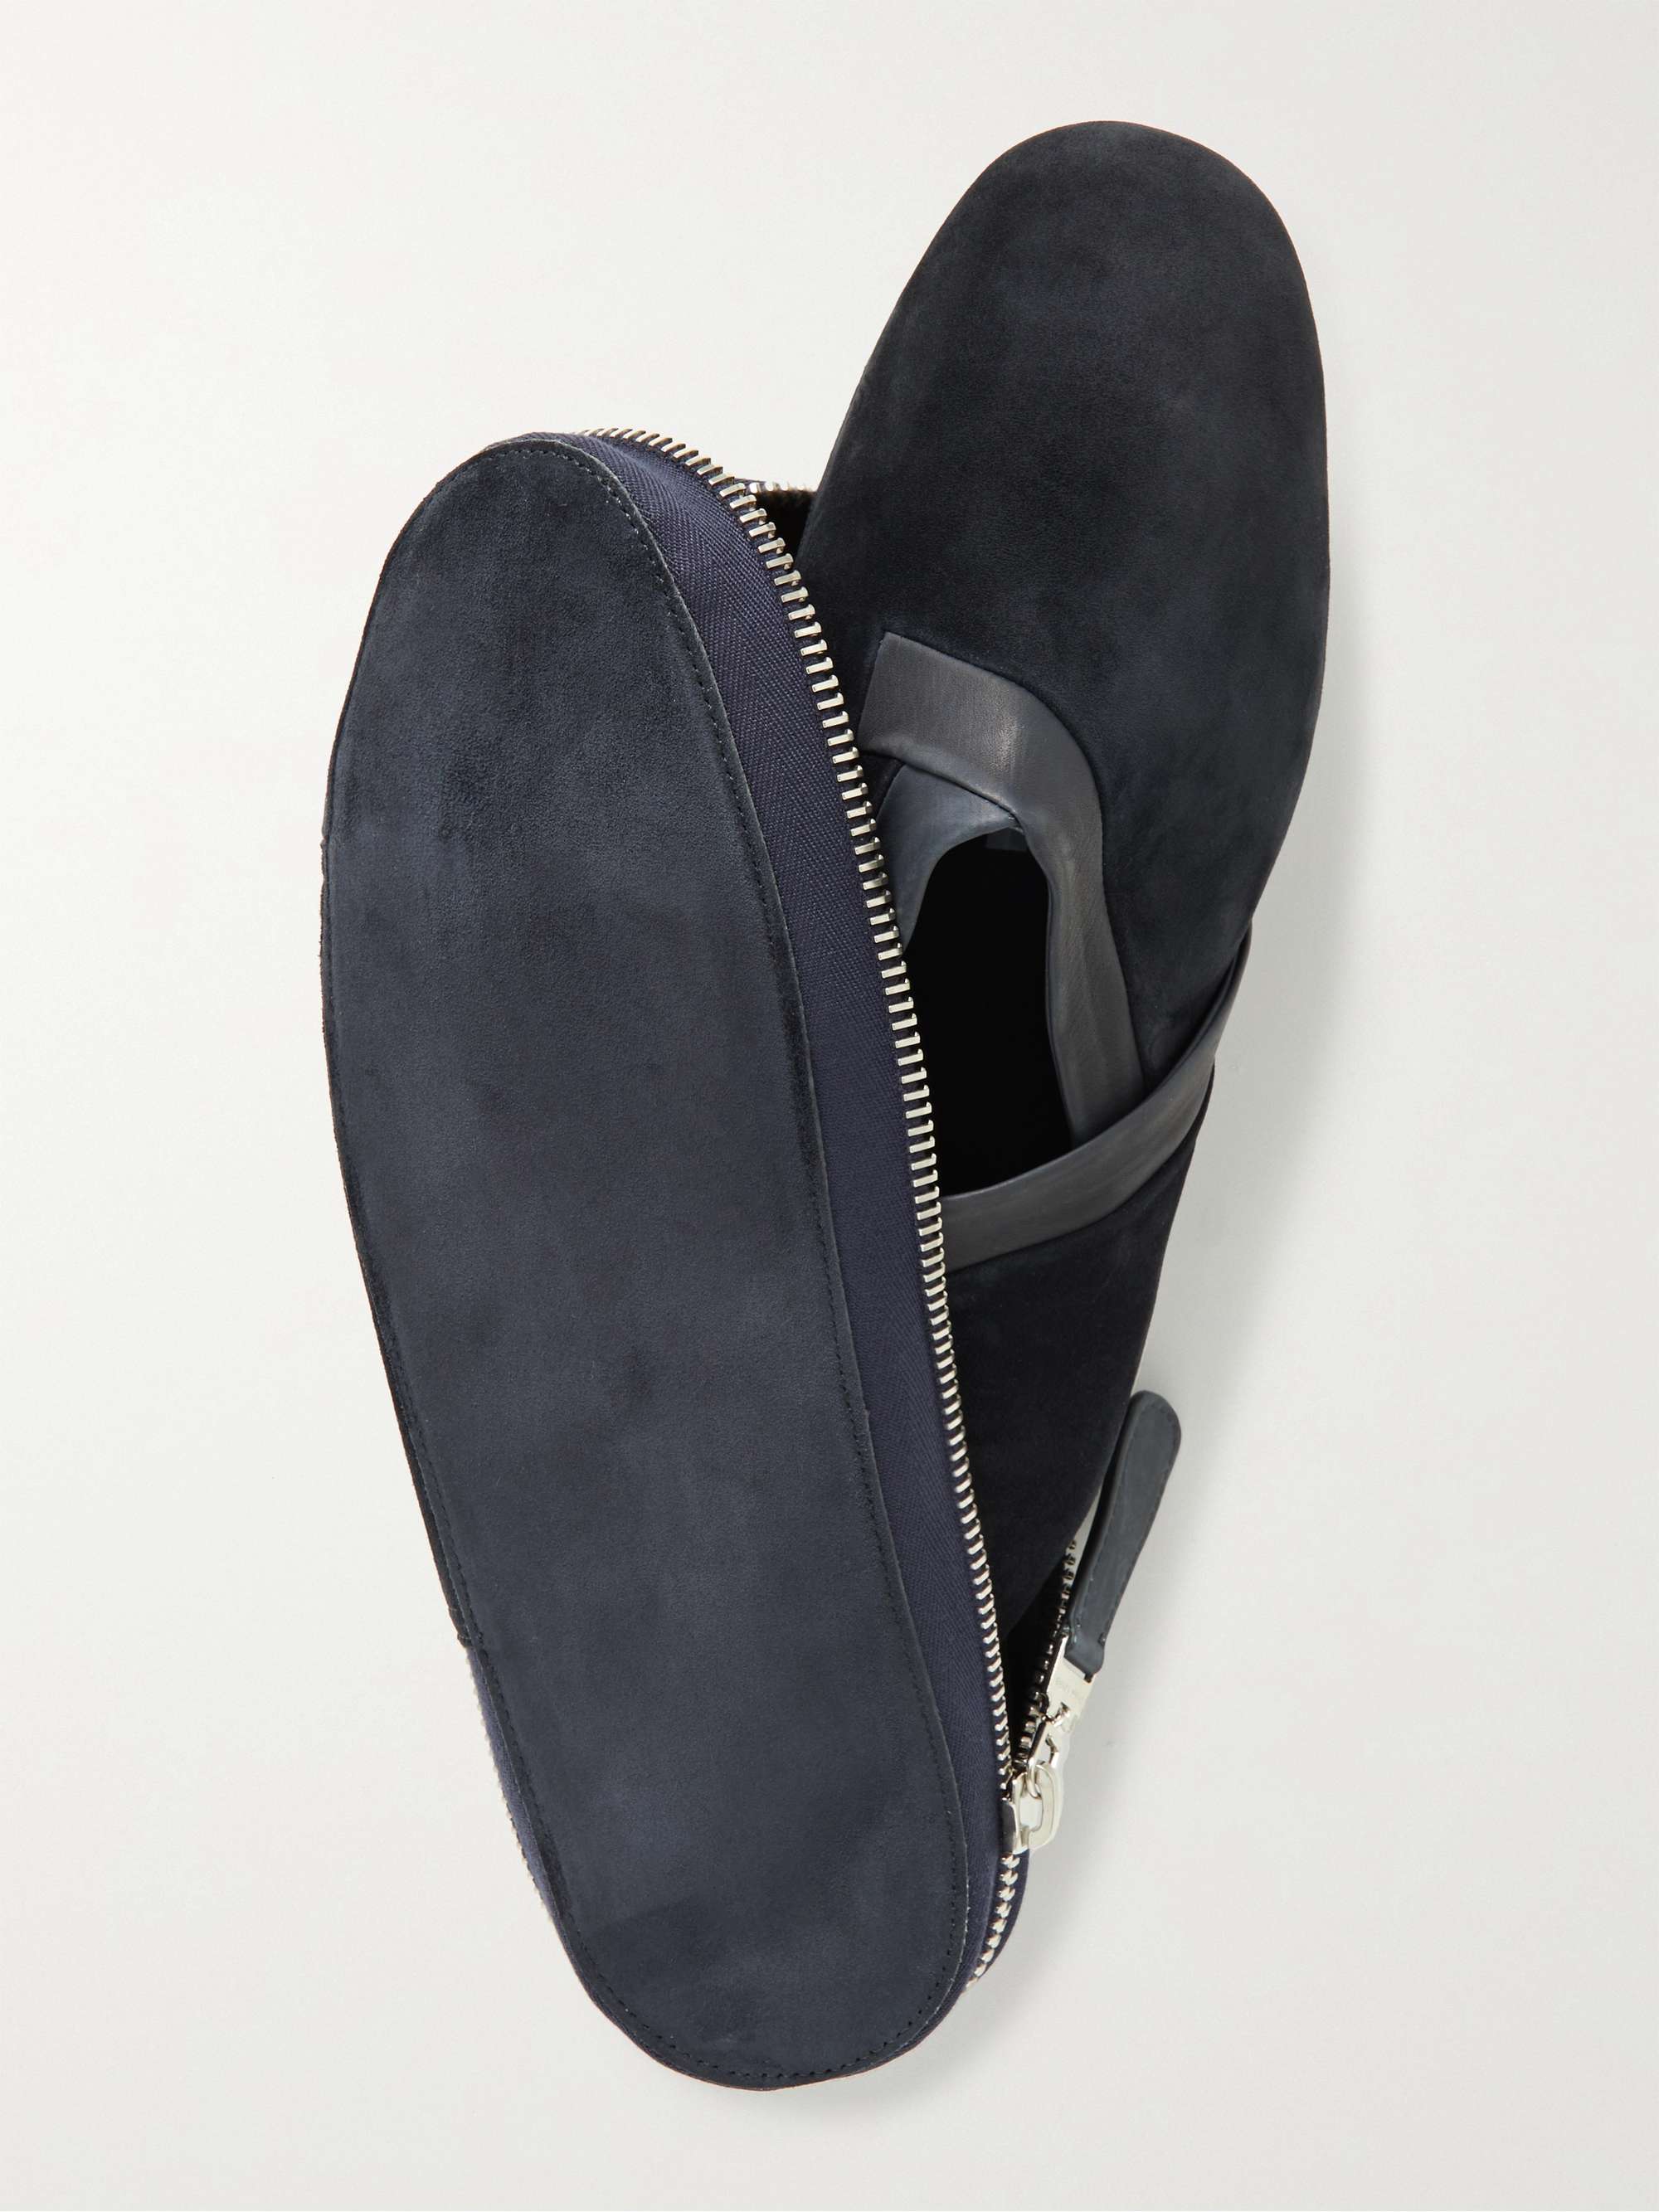 JOHN LOBB Knighton Leather-Trimmed Suede Slippers